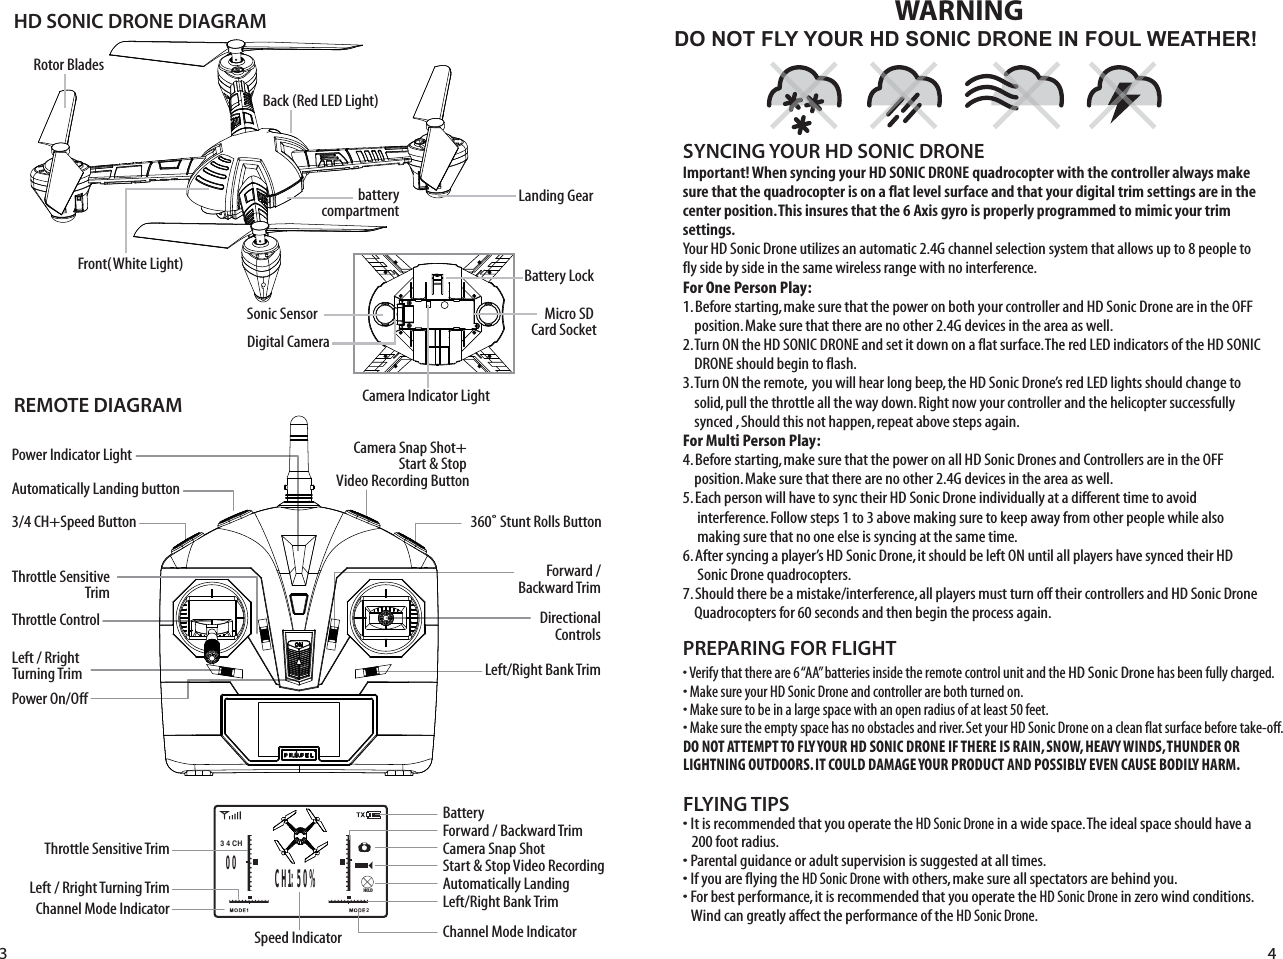 HD SONIC DRONE DIAGRAMREMOTE DIAGRAMFLYING TIPS• It is recommended that you operate the HD Sonic Drone in a wide space. The ideal space should have a    200 foot radius. • Parental guidance or adult supervision is suggested at all times.• If you are flying the HD Sonic Drone with others, make sure all spectators are behind you.• For best performance, it is recommended that you operate the HD Sonic Drone in zero wind conditions.     Wind can greatly affect the performance of the HD Sonic Drone.Important! When syncing your HD SONIC DRONE quadrocopter with the controller always make sure that the quadrocopter is on a flat level surface and that your digital trim settings are in the center position. This insures that the 6 Axis gyro is properly programmed to mimic your trim settings. Your HD Sonic Drone utilizes an automatic 2.4G channel selection system that allows up to 8 people to fly side by side in the same wireless range with no interference.For One Person Play:1. Before starting, make sure that the power on both your controller and HD Sonic Drone are in the OFF      position. Make sure that there are no other 2.4G devices in the area as well. 2. Turn ON the HD SONIC DRONE and set it down on a flat surface. The red LED indicators of the HD SONIC     DRONE should begin to flash.3. Turn ON the remote,  you will hear long beep, the HD Sonic Drone’s red LED lights should change to         solid, pull the throttle all the way down. Right now your controller and the helicopter successfully      synced , Should this not happen, repeat above steps again. For Multi Person Play: 4. Before starting, make sure that the power on all HD Sonic Drones and Controllers are in the OFF     position. Make sure that there are no other 2.4G devices in the area as well.5. Each person will have to sync their HD Sonic Drone individually at a different time to avoid      interference. Follow steps 1 to 3 above making sure to keep away from other people while also      making sure that no one else is syncing at the same time. 6. After syncing a player’s HD Sonic Drone, it should be left ON until all players have synced their HD      Sonic Drone quadrocopters. 7. Should there be a mistake/interference, all players must turn off their controllers and HD Sonic Drone       Quadrocopters for 60 seconds and then begin the process again. SYNCING YOUR HD SONIC DRONEBattery LockSonic SensorPower Indicator LightThrottle Control Throttle SensitiveTrimAutomatically Landing buttonForward /Backward TrimDirectionalControlsPower On/OffLeft / Rright Turning Trim Left/Right Bank TrimLeft/Right Bank TrimDO NOT FLY YOUR HD SONIC DRONE IN FOUL WEATHER!WARNING• Verify that there are 6 “AA” batteries inside the remote control unit and the HD Sonic Drone has been fully charged.• Make sure your HD Sonic Drone and controller are both turned on. • Make sure to be in a large space with an open radius of at least 50 feet. • Make sure the empty space has no obstacles and river. Set your HD Sonic Drone on a clean flat surface before take-off.DO NOT ATTEMPT TO FLY YOUR HD SONIC DRONE IF THERE IS RAIN, SNOW, HEAVY WINDS, THUNDER OR LIGHTNING OUTDOORS. IT COULD DAMAGE YOUR PRODUCT AND POSSIBLY EVEN CAUSE BODILY HARM.PREPARING FOR FLIGHT 3 4Rotor Blades Front(White Light)Back (Red LED Light)Landing GearDigital Camera Camera Snap Shot+ Start &amp; Stop Video Recording Button3/4 CH+Speed Button 360˚ Stunt Rolls ButtonBatteryCamera Snap ShotStart &amp; Stop Video RecordingAutomatically LandingChannel Mode IndicatorSpeed IndicatorChannel Mode IndicatorLeft / Rright Turning TrimThrottle Sensitive TrimCamera Indicator LightMicro SD Card SocketbatterycompartmentCH1: 50%3 4 CH200HOLDForward / Backward Trim